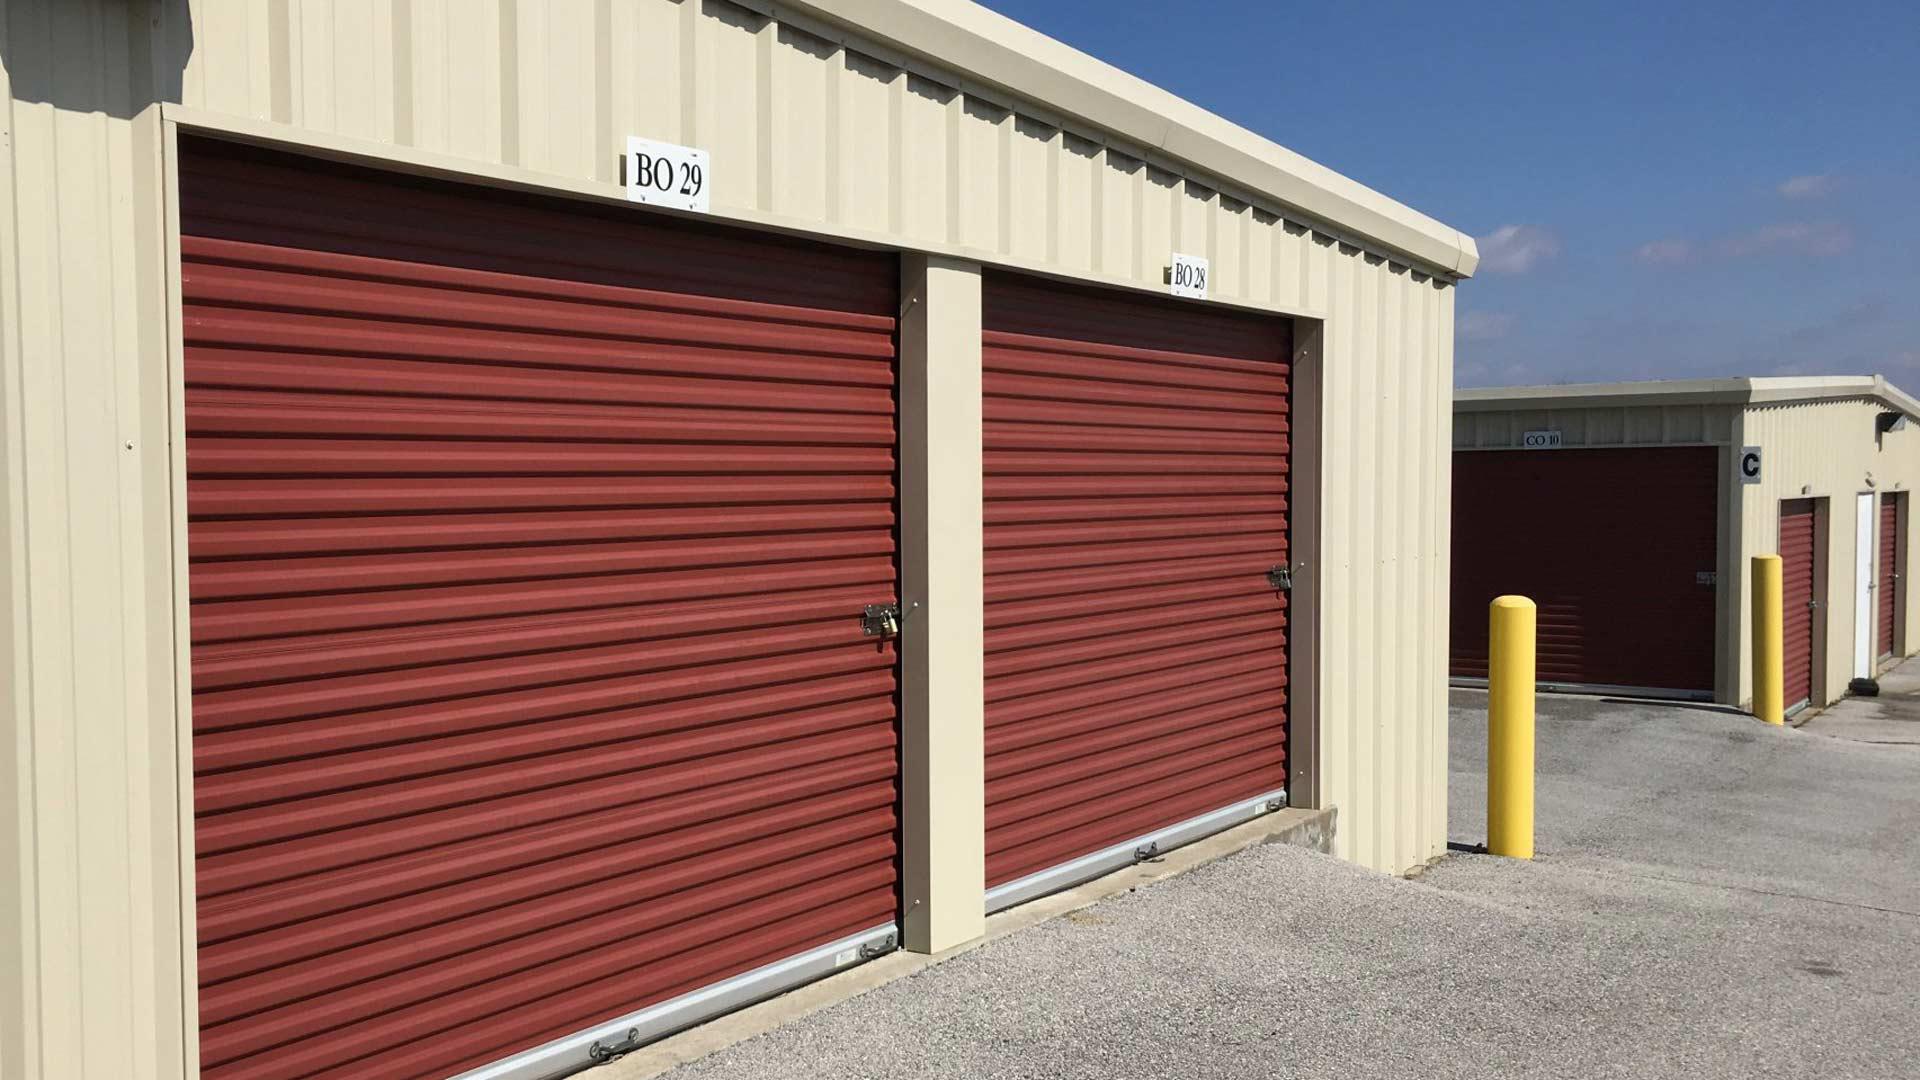 Whether you want to declutter your office, need seasonal or long-term storage for tools or equipment, or want temporary storage while you complete a move or remodeling project, check out our convenient storage facility to fulfill all of your storage needs.